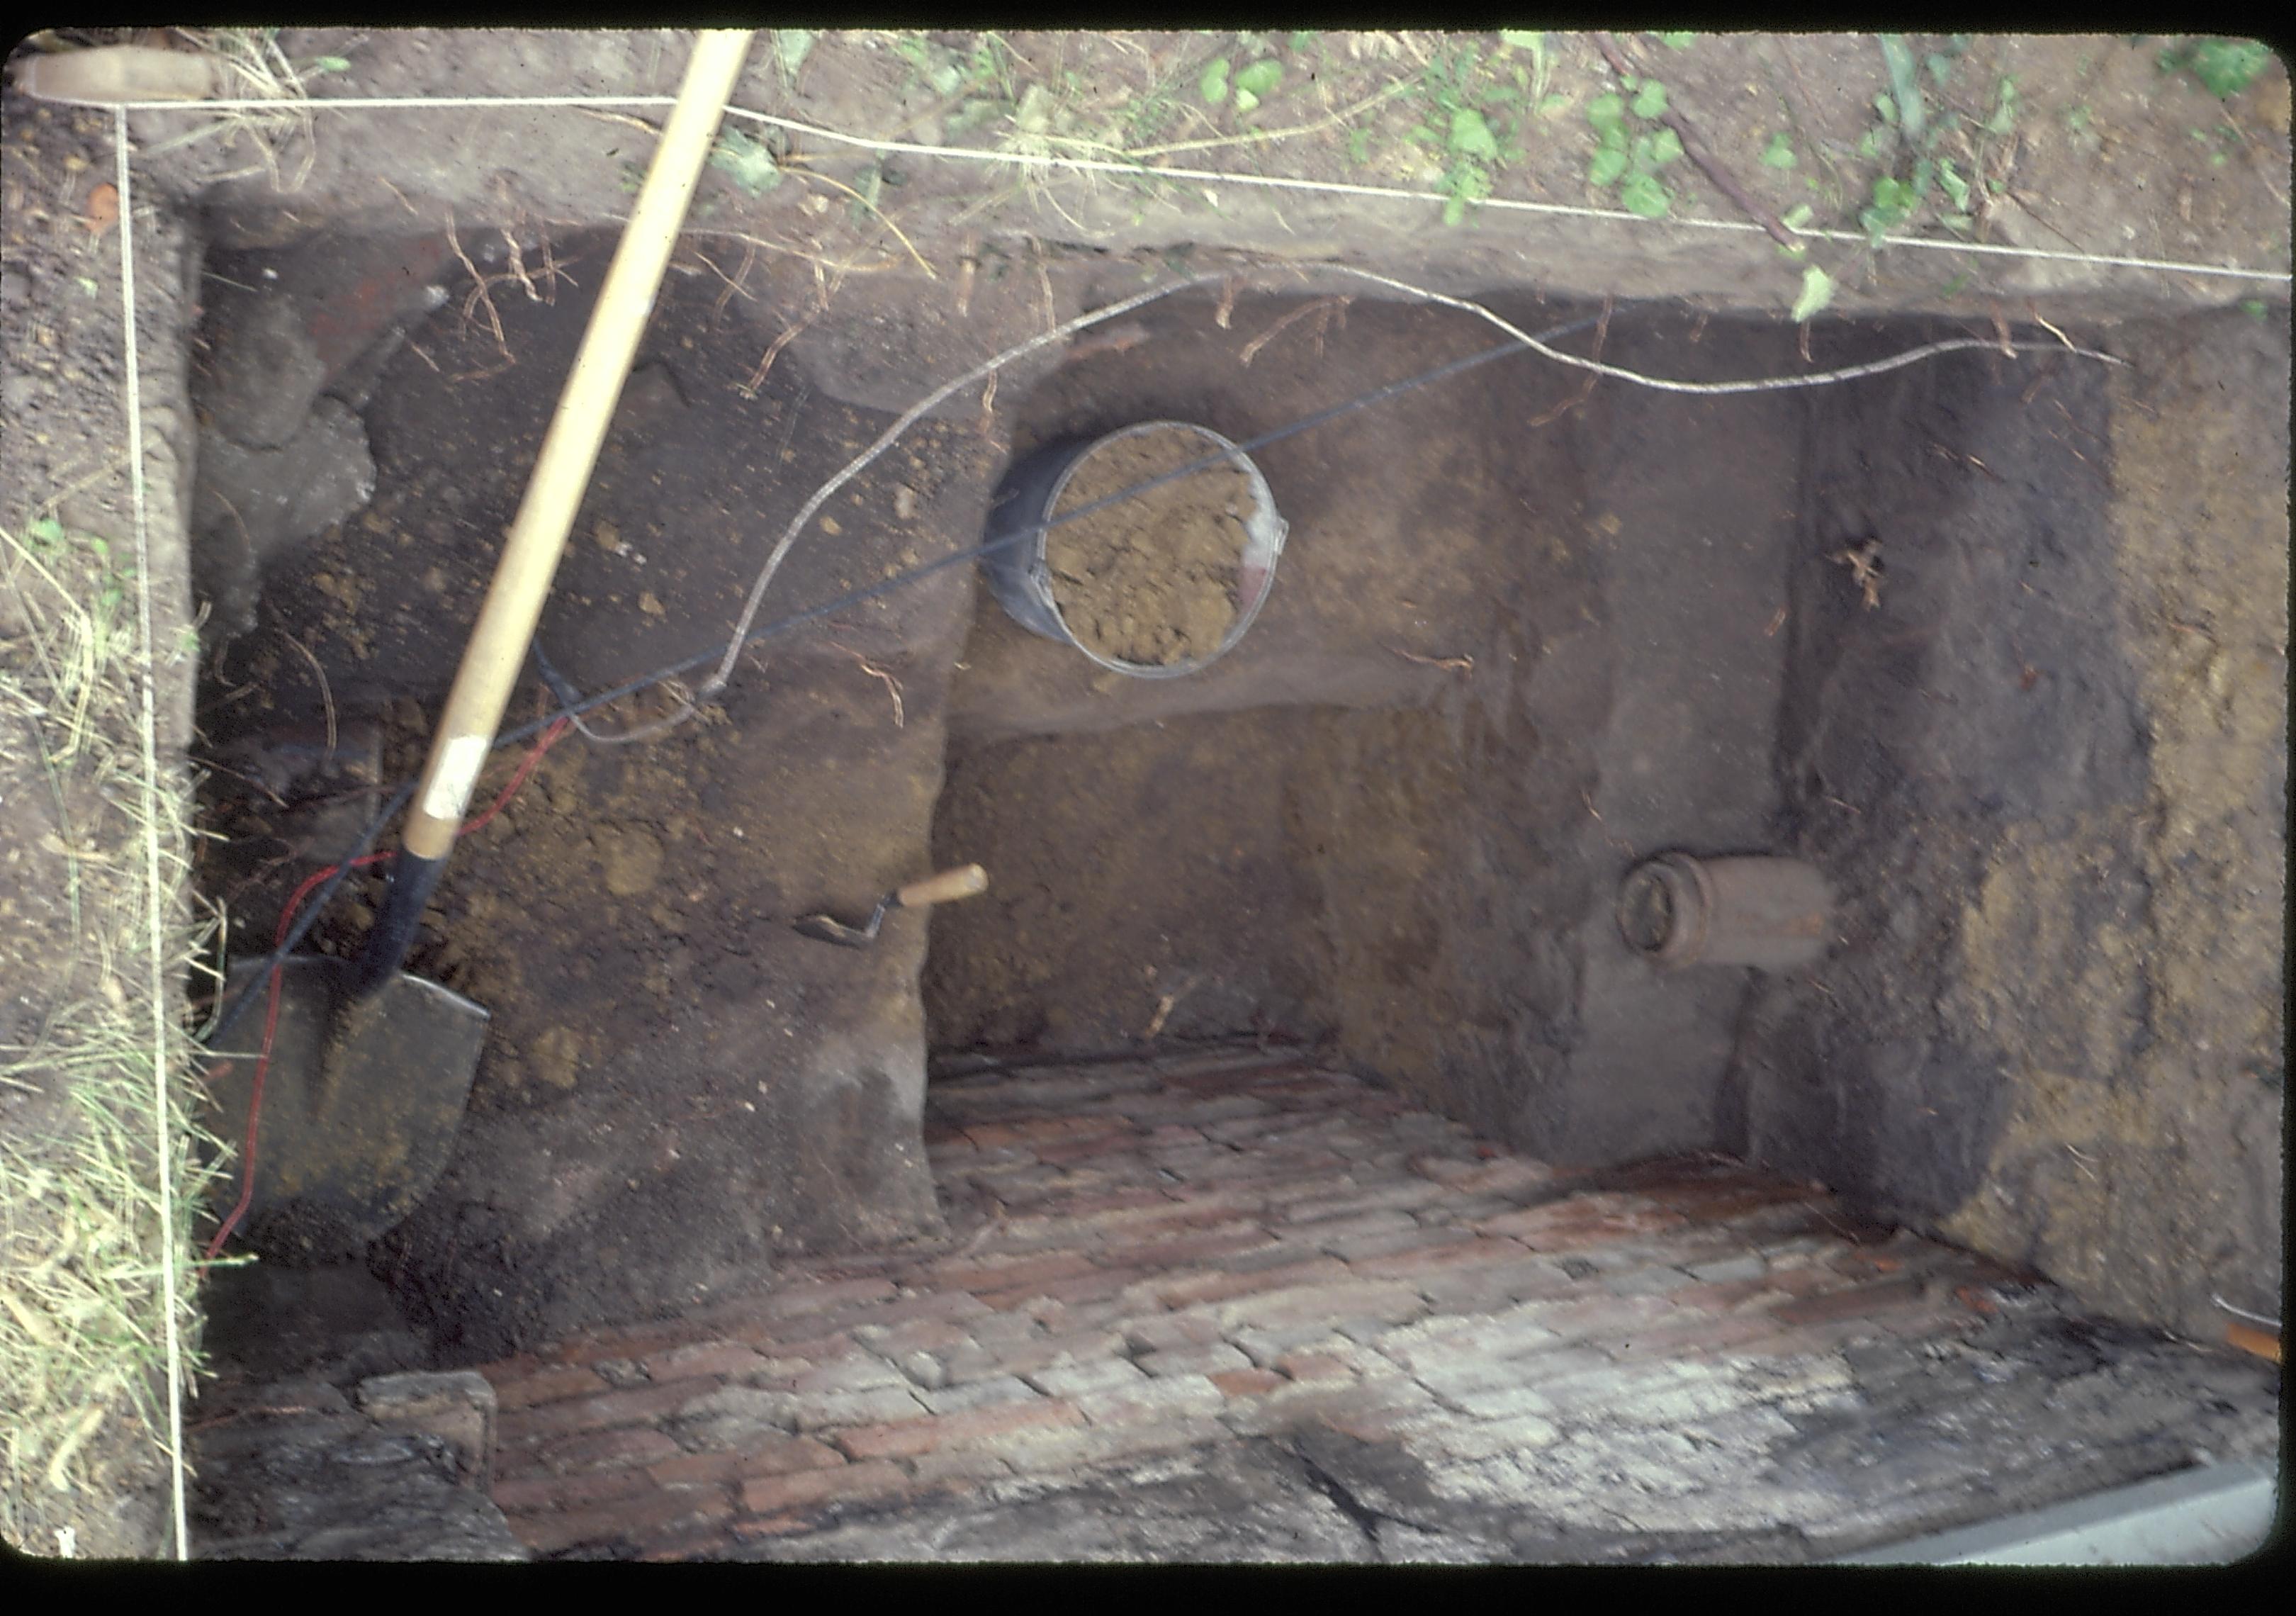 Archeology pit located on the Lincoln Home foundation. A drain tile can be seen on the right side of the photo.